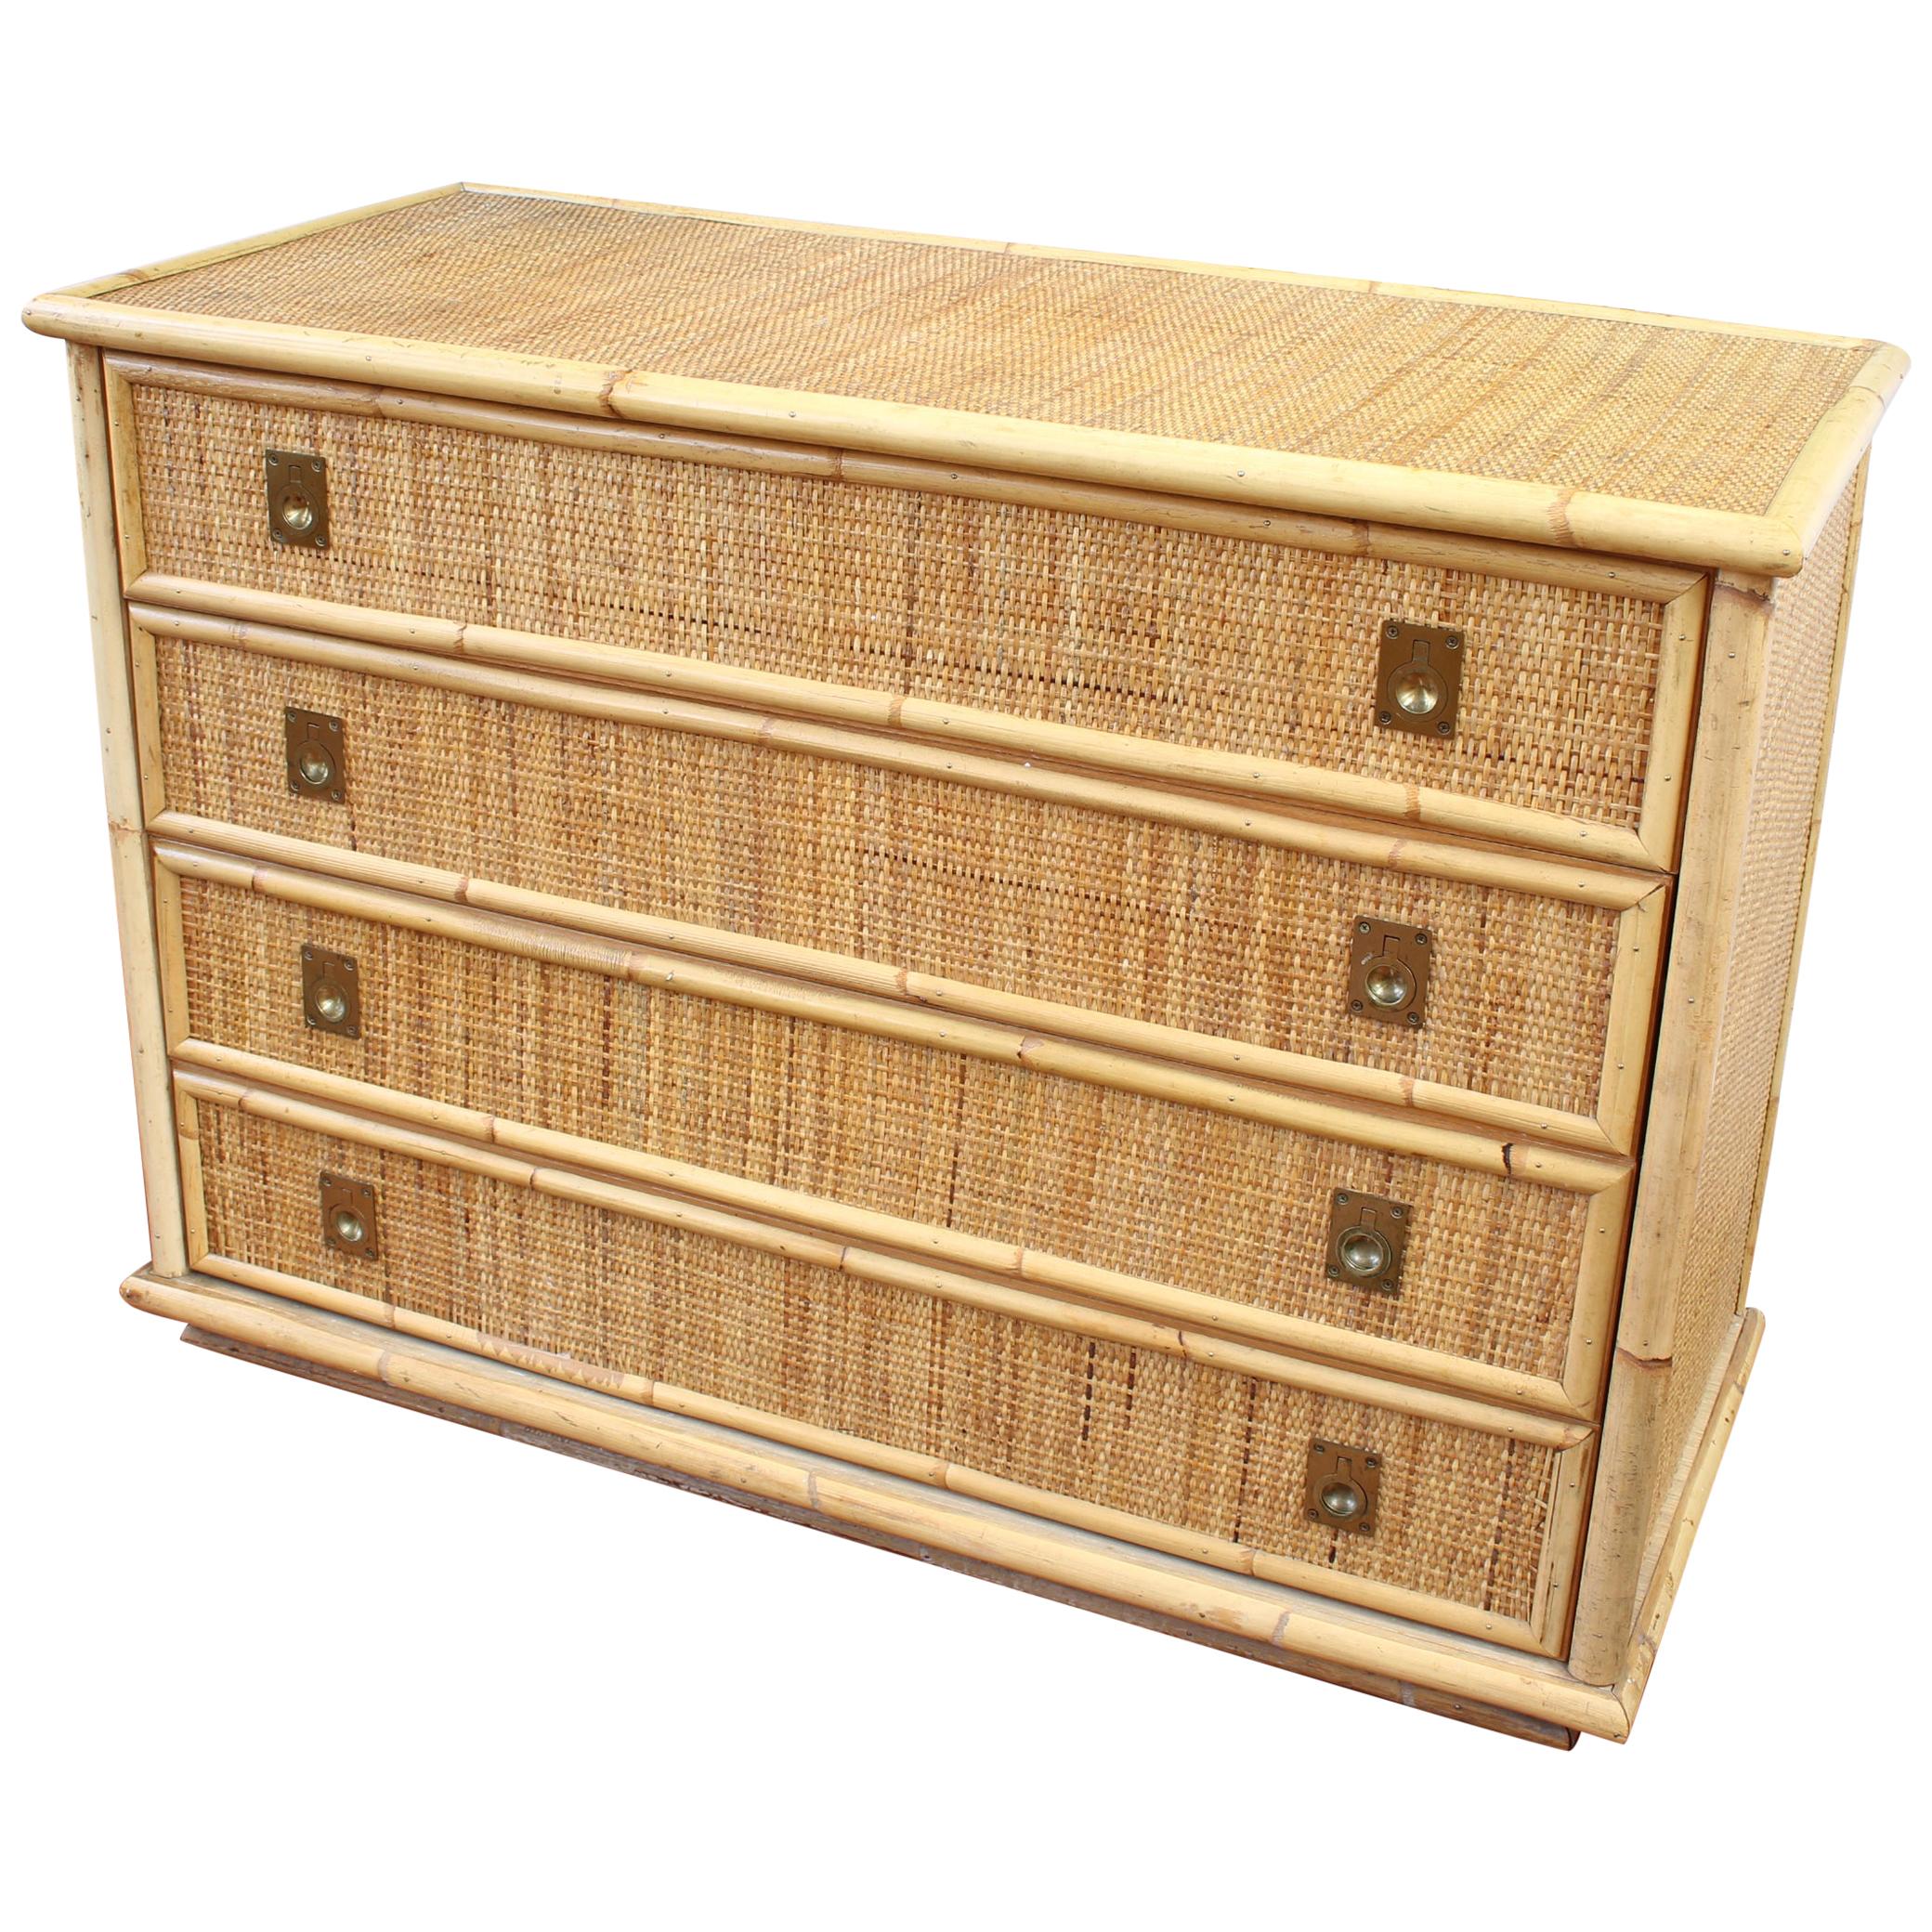 Wicker Dressers 10 For Sale At 1stdibs